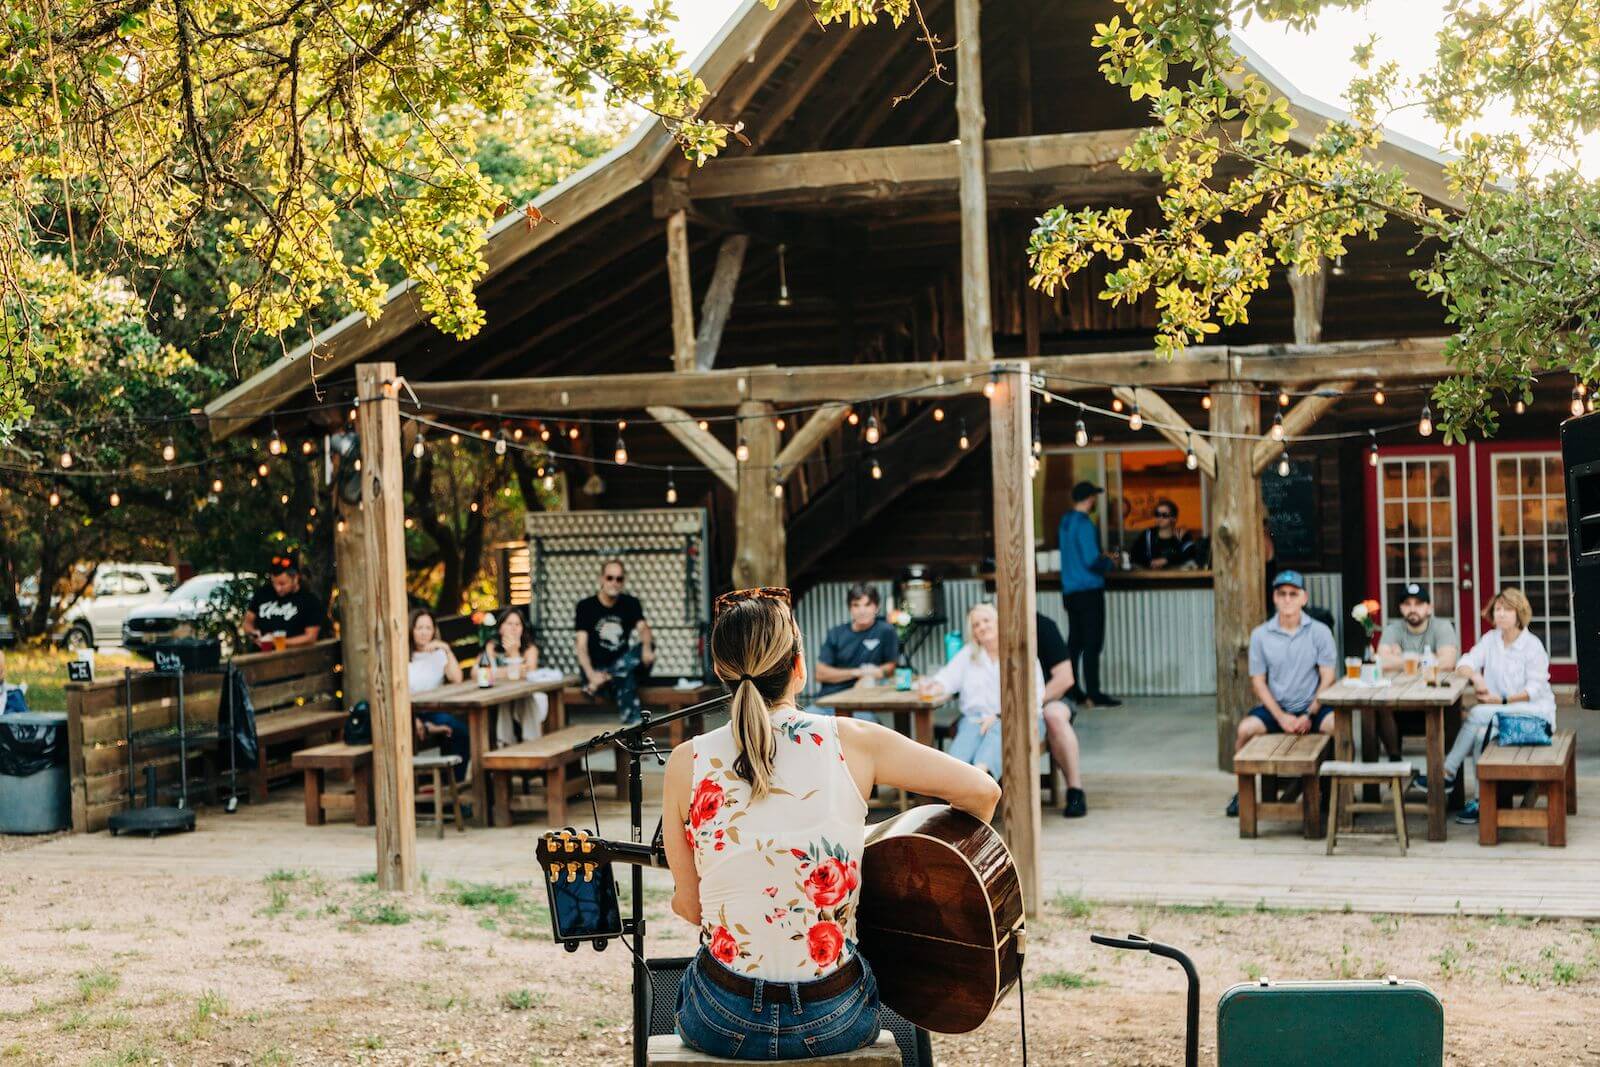 Live music at Jester King Brewery's Cedar Pavilion